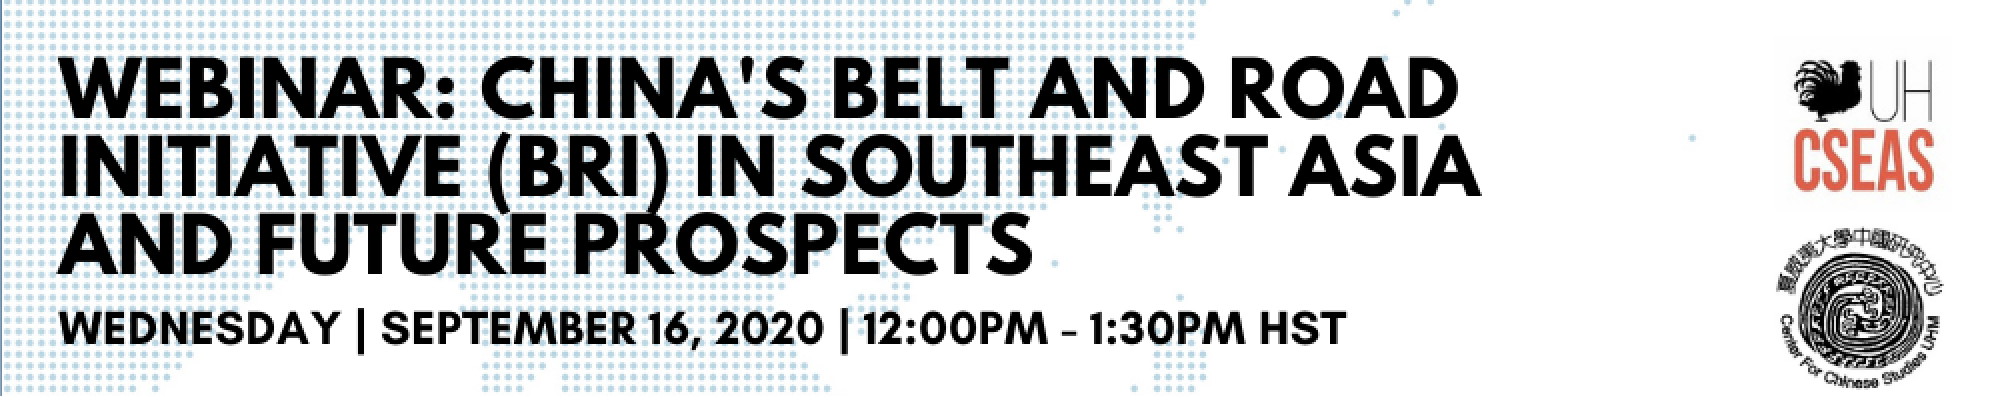 Poster for webinar "China's Belt and Road Initiative (BRI) in Southeast Asia and Future Prospects" in all black capital letters. Background is map of Southeast Asia comprised of blue dots. UH Center for Southeast Asia Studies, Center for Chinese Studies and East-West Center logos on top right corner. Event information all in black text.